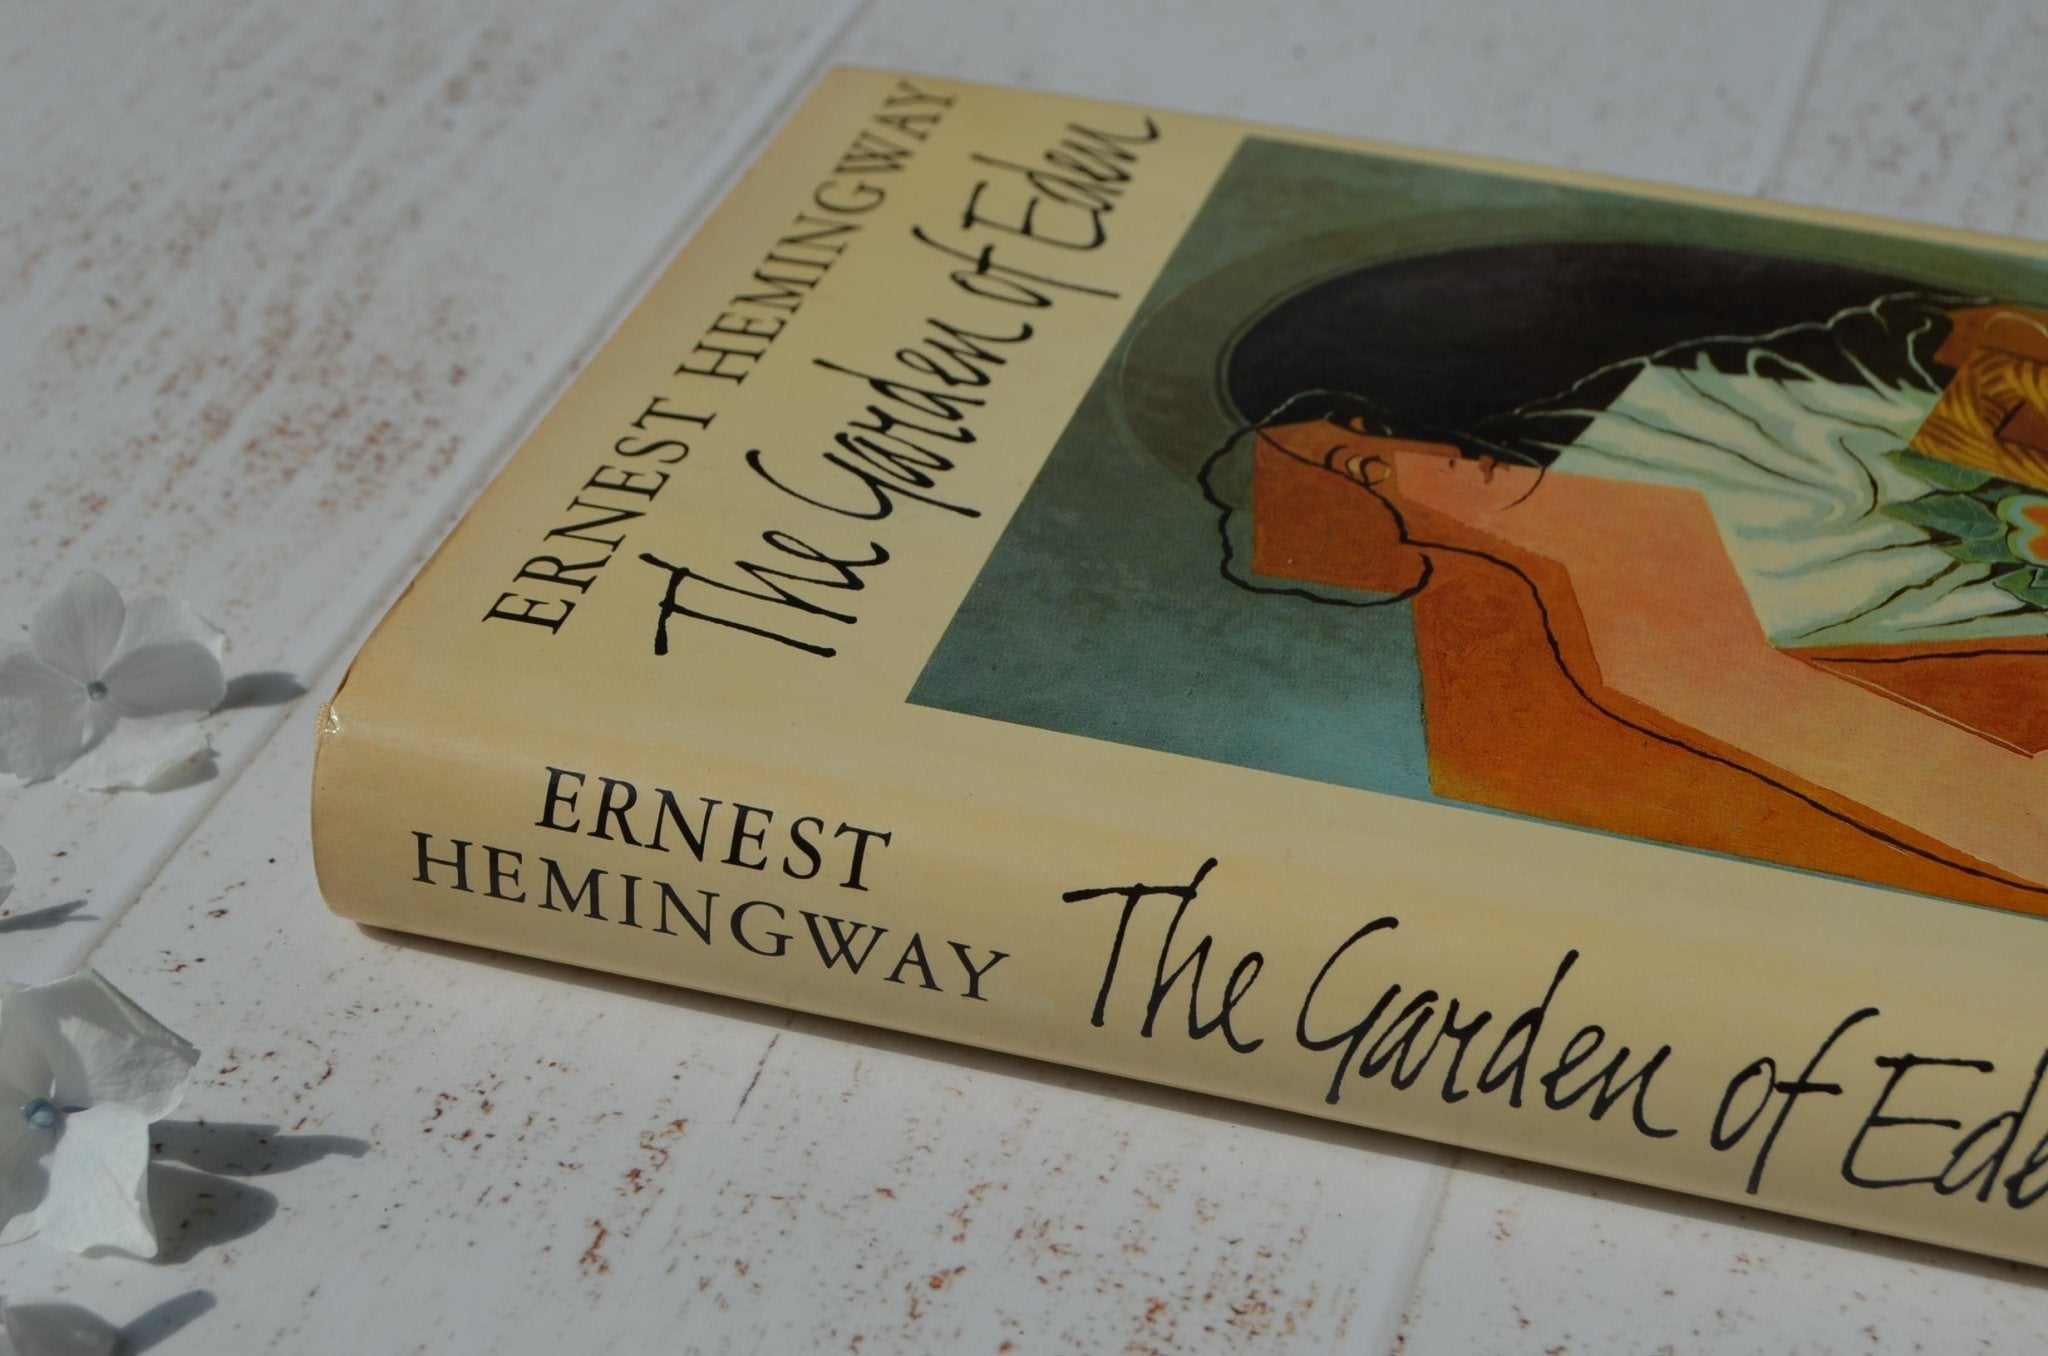 Fifth Printing – The Garden of Eden by Ernest Hemingway 1986 - Brookfield Books